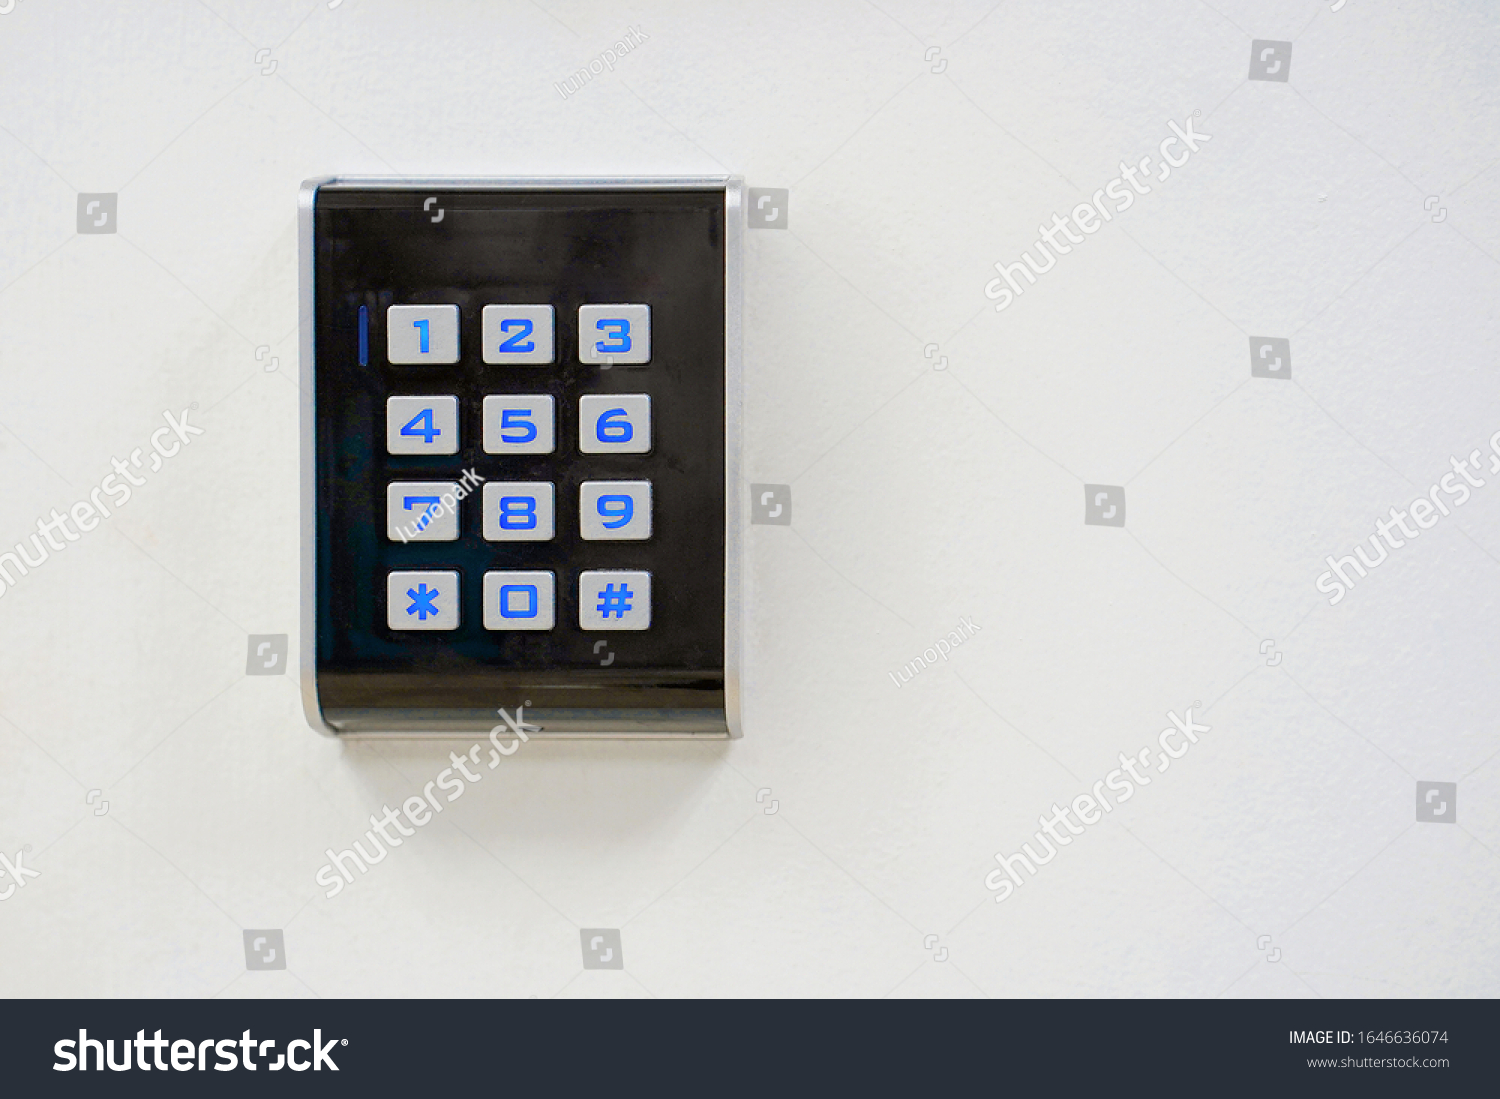 Secure password on keyboard for opening home house door. Password code Security keypad system protected in public building. Security code combination to unlock the door.                             #1646636074